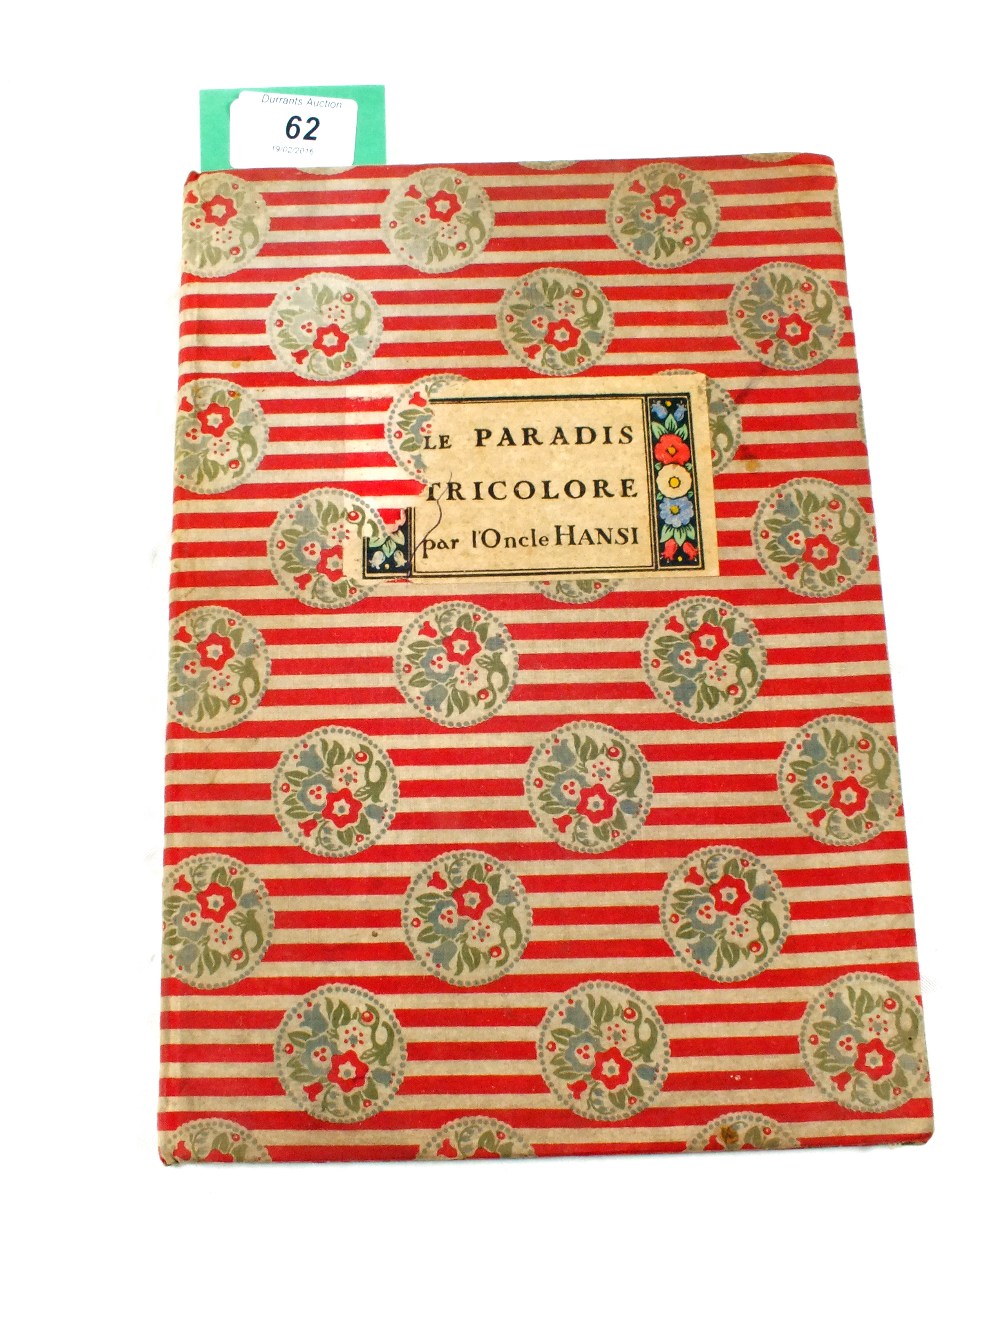 A copy of "Le Paradis Tricolore" in full colour and dated 1918,